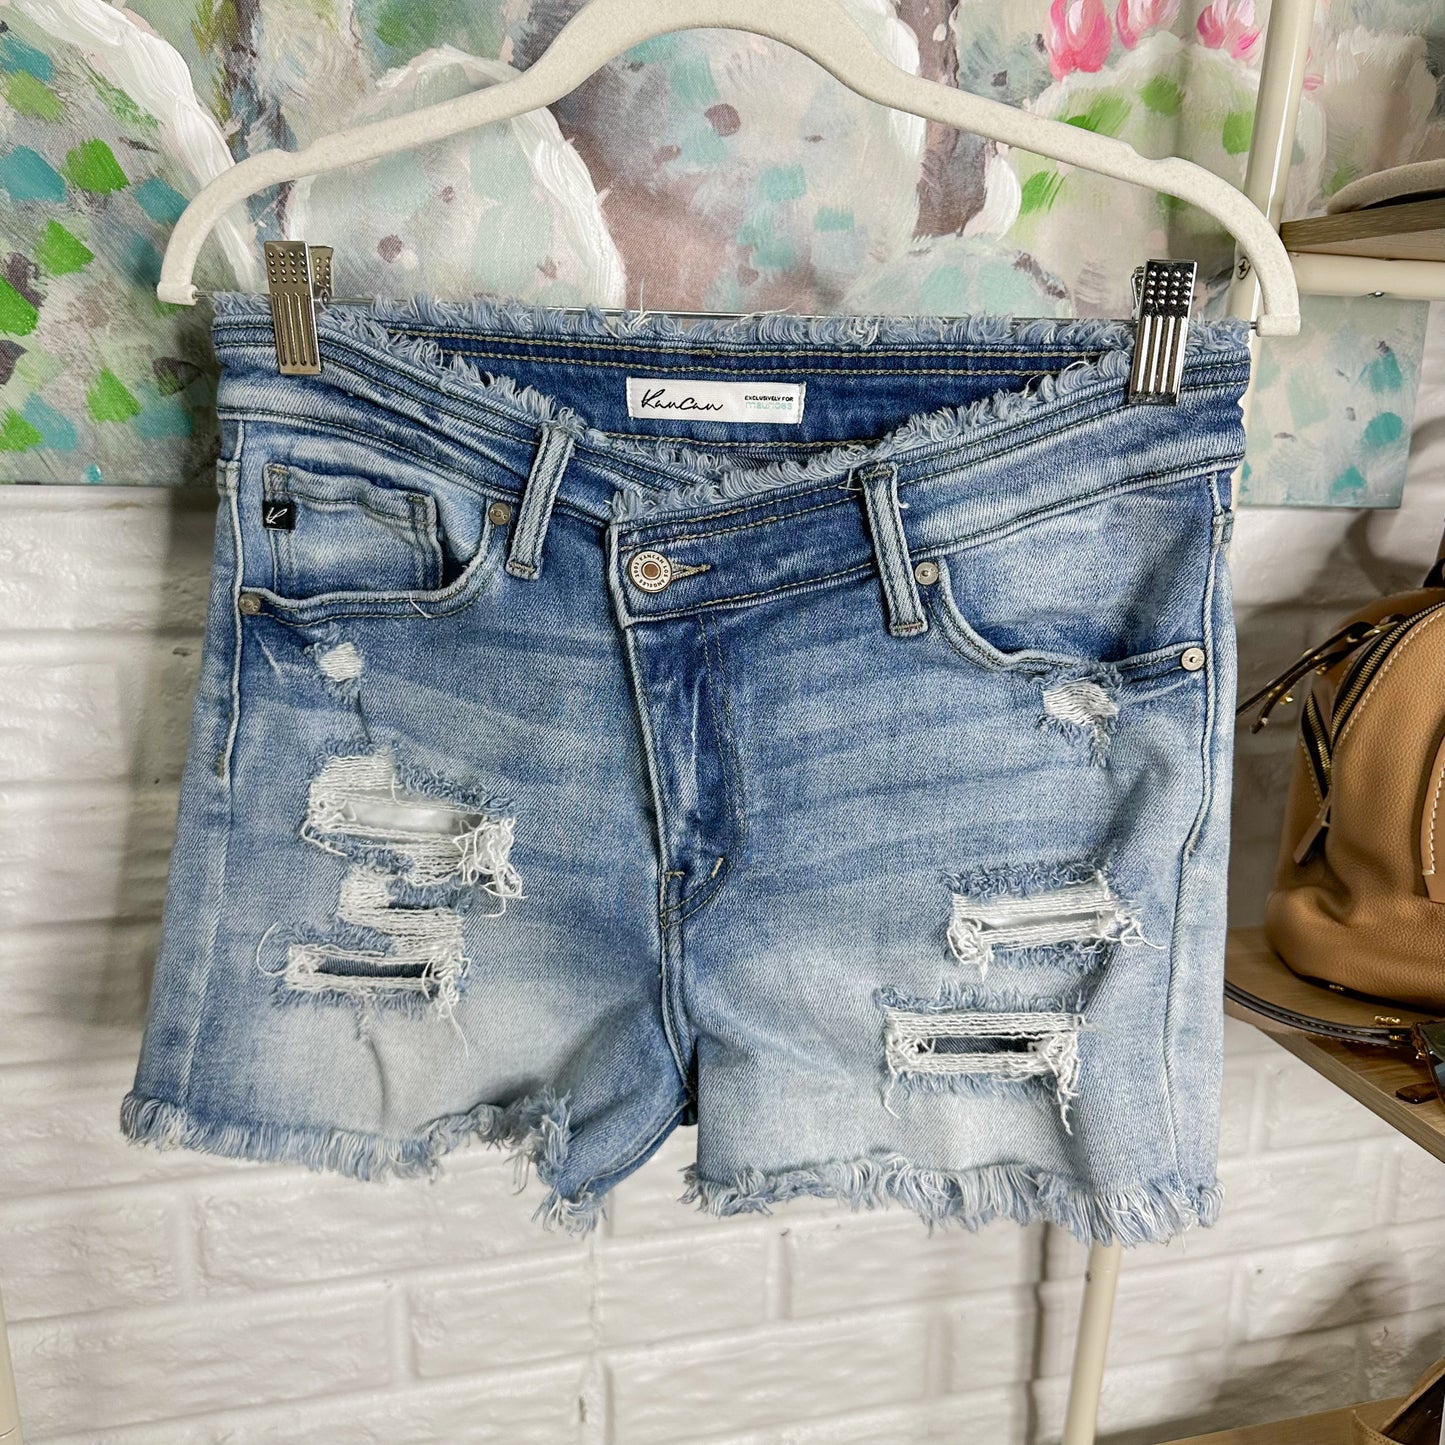 KanCan Crossover Distressed Shorts Size 28